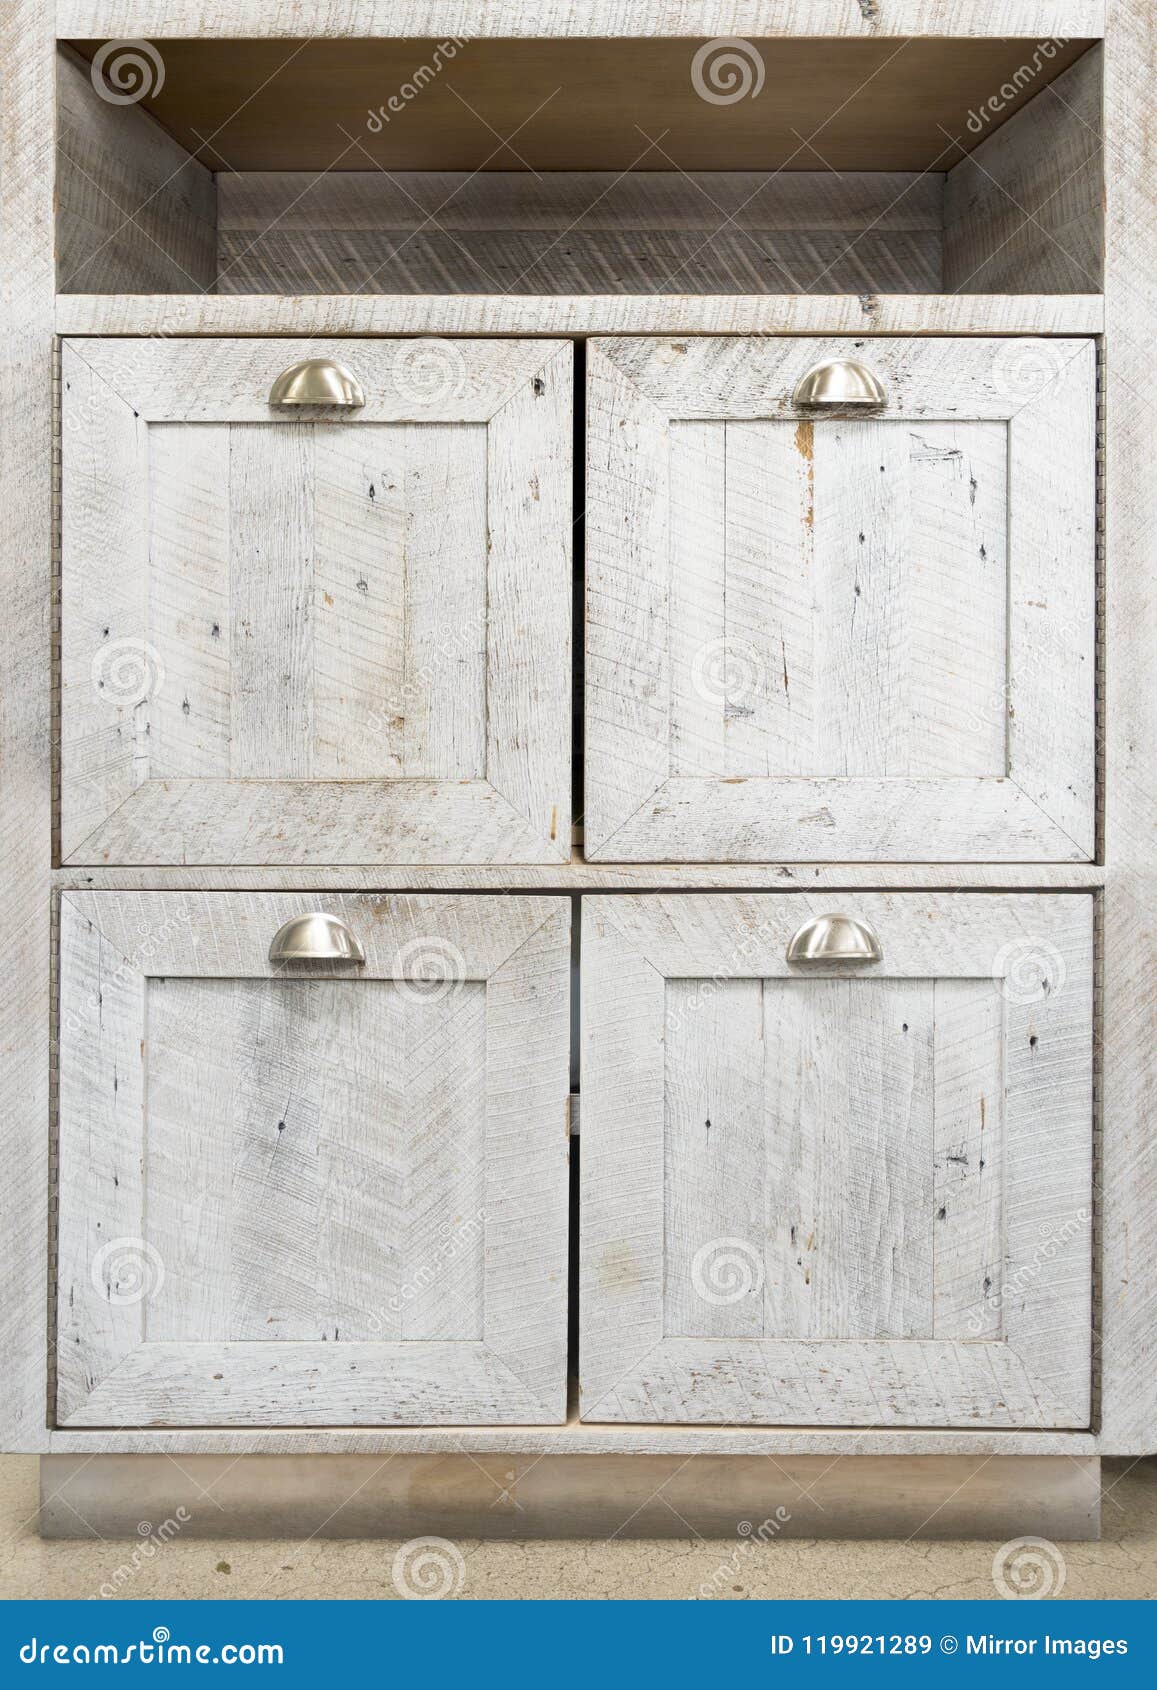 Distressed White Wooden Floor Cabinets Stock Image Image Of